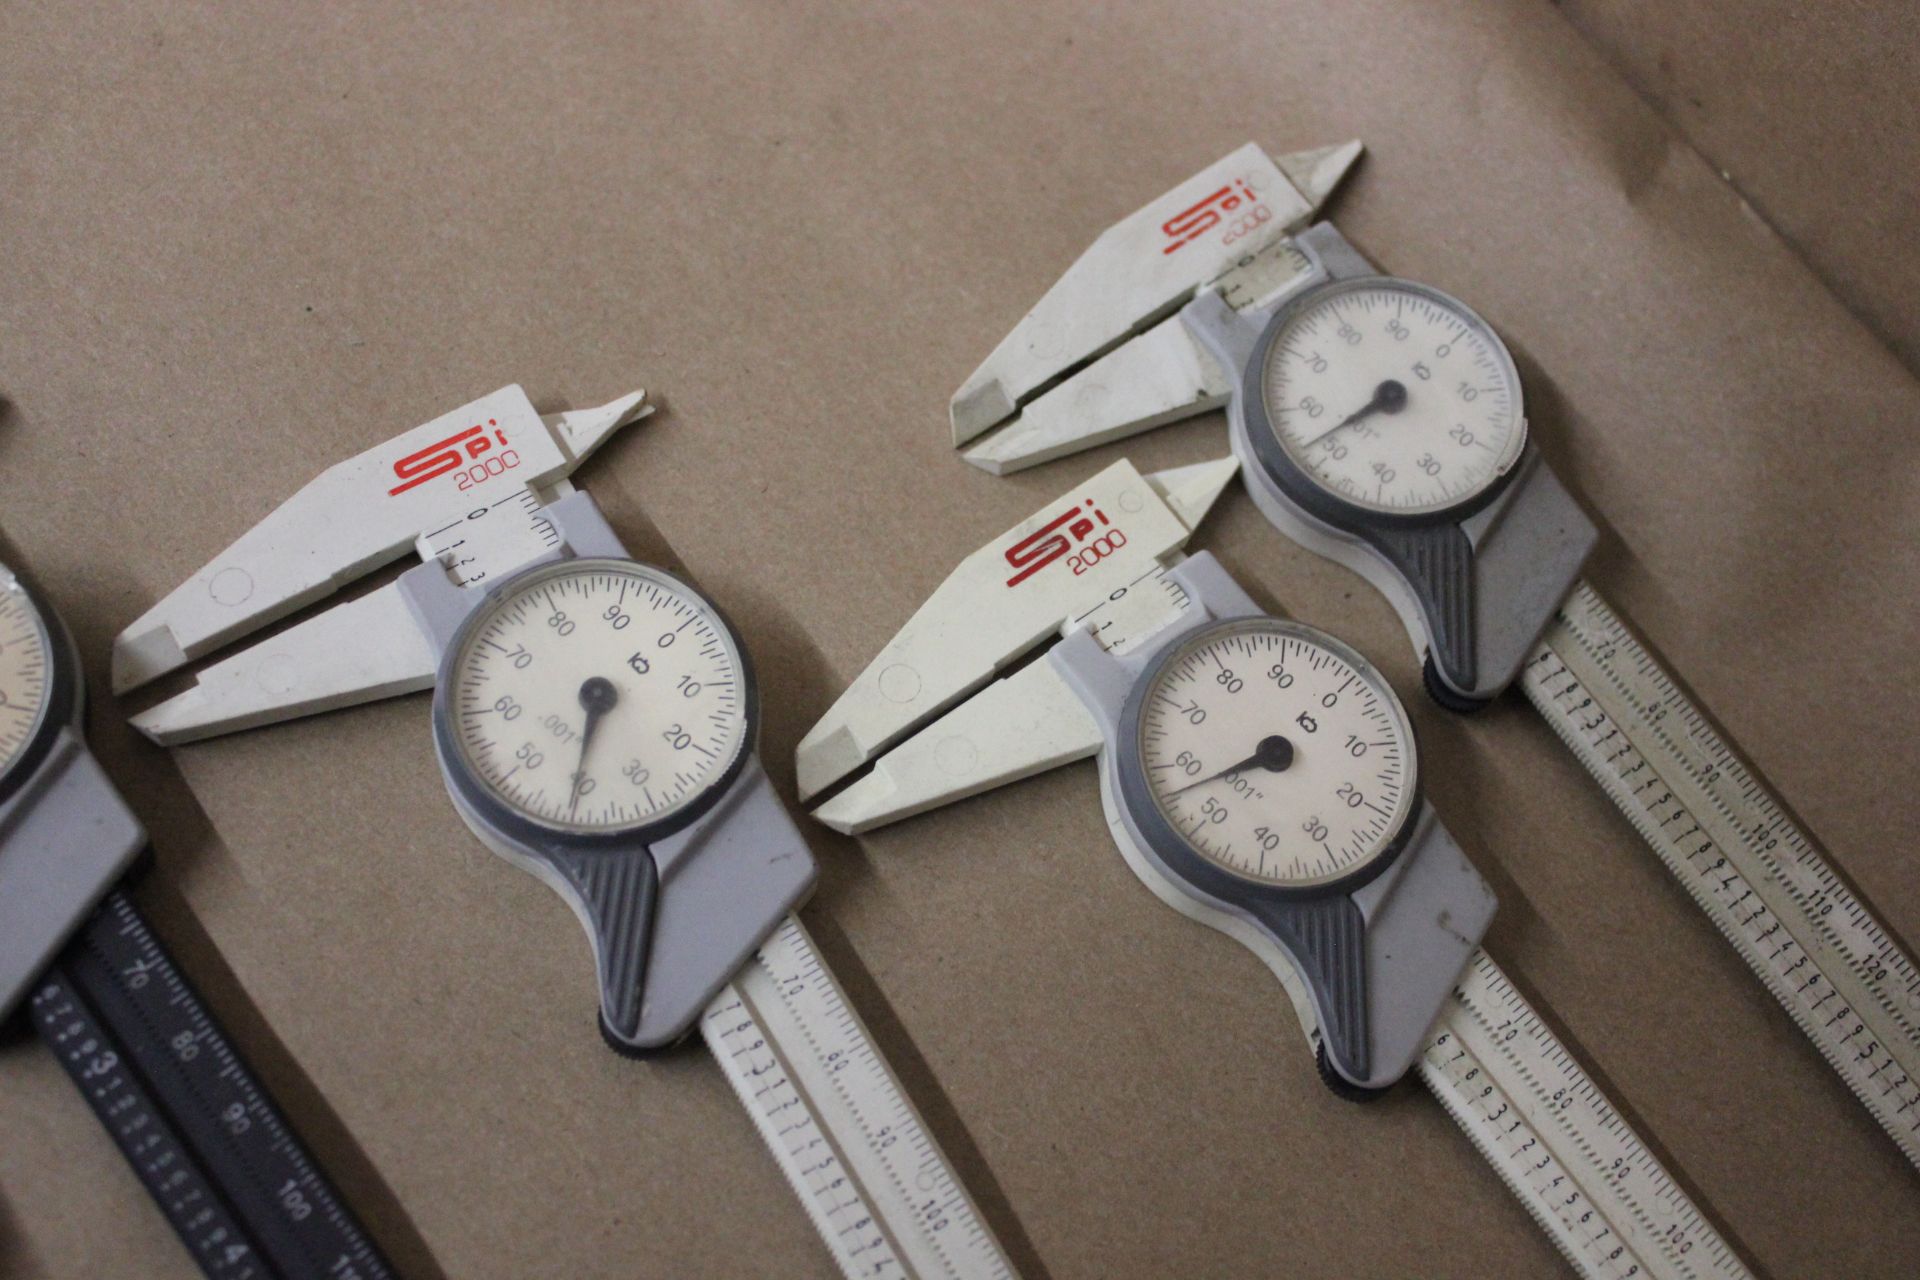 LOT OF SI 2000 DIAL CALIPERS - Image 6 of 7